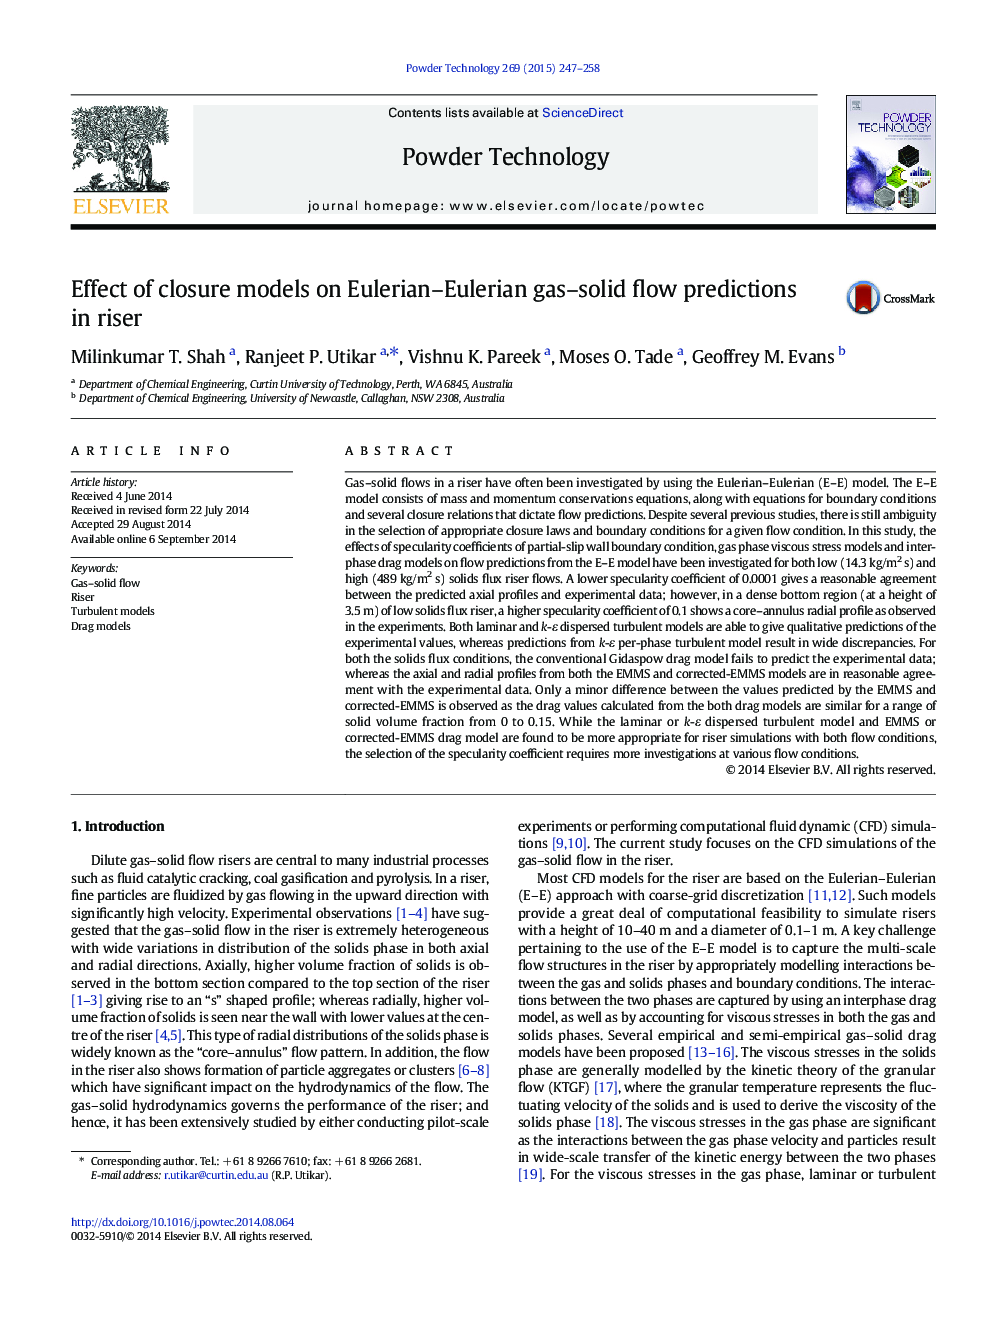 Effect of closure models on Eulerian–Eulerian gas–solid flow predictions in riser